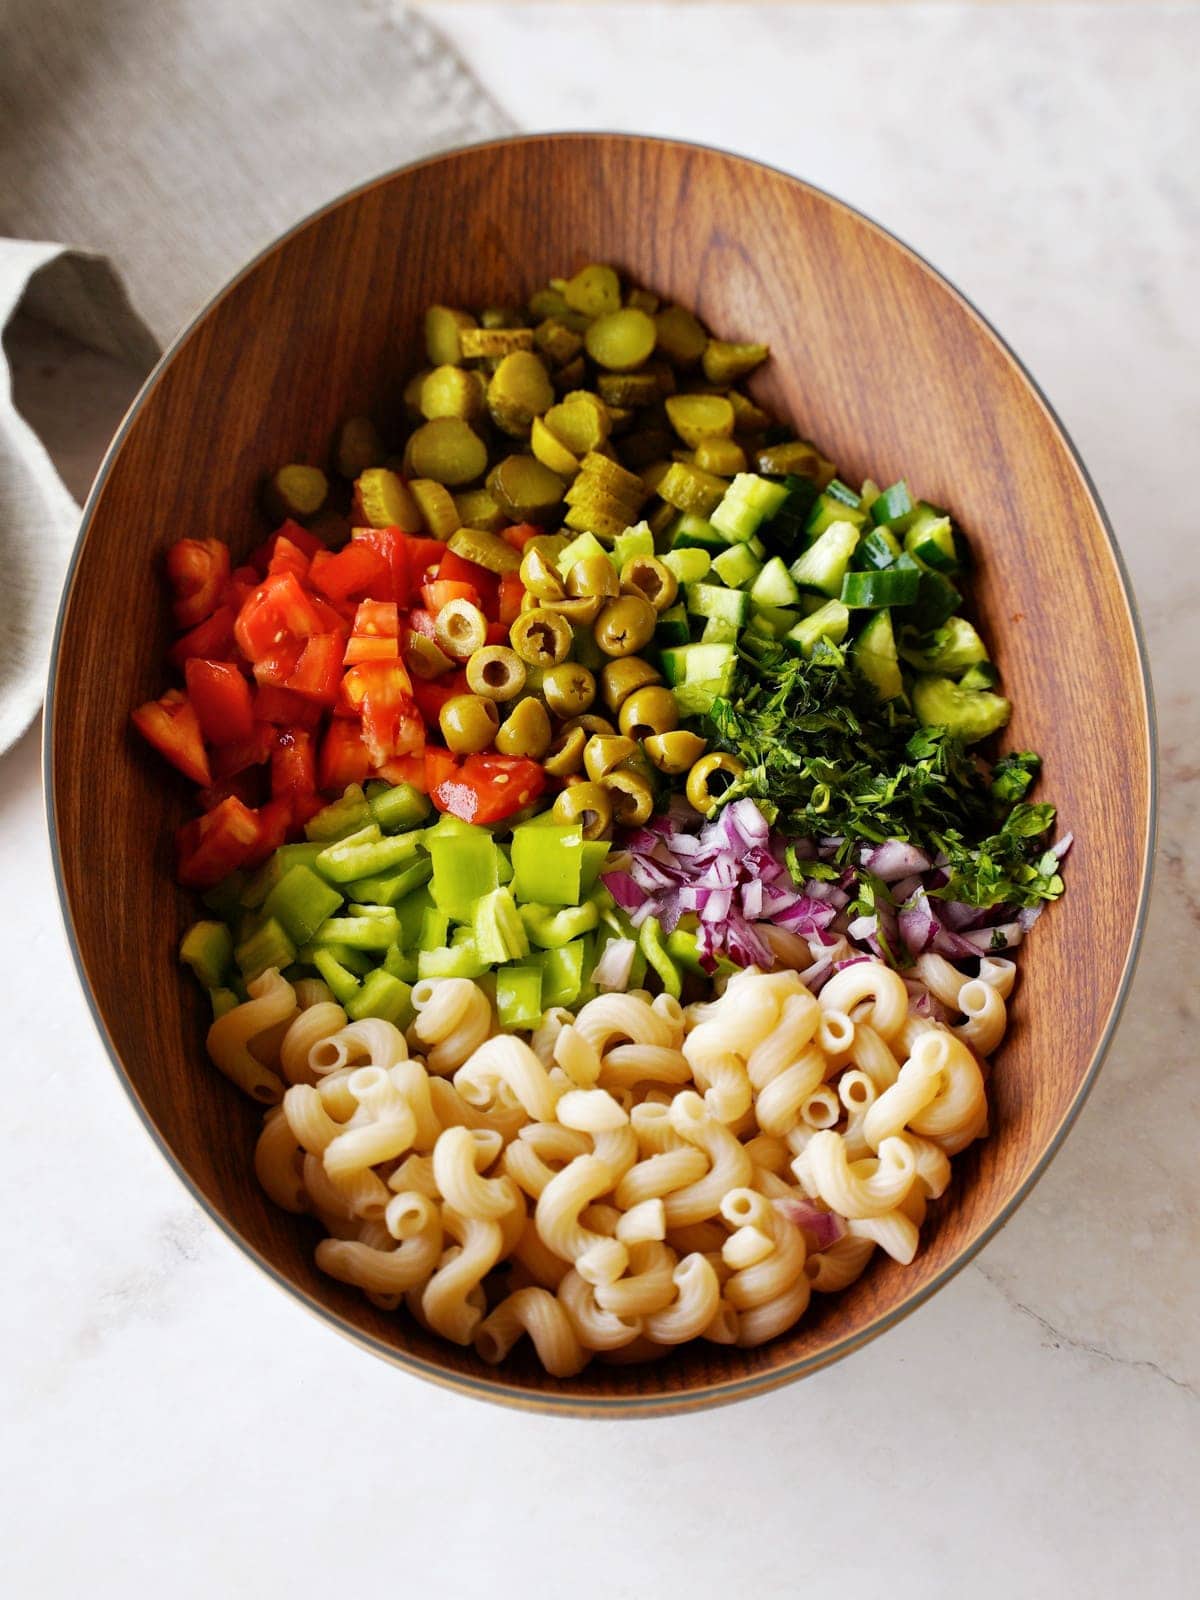 chopped vegetables and cooked pasta in large wooden bowl